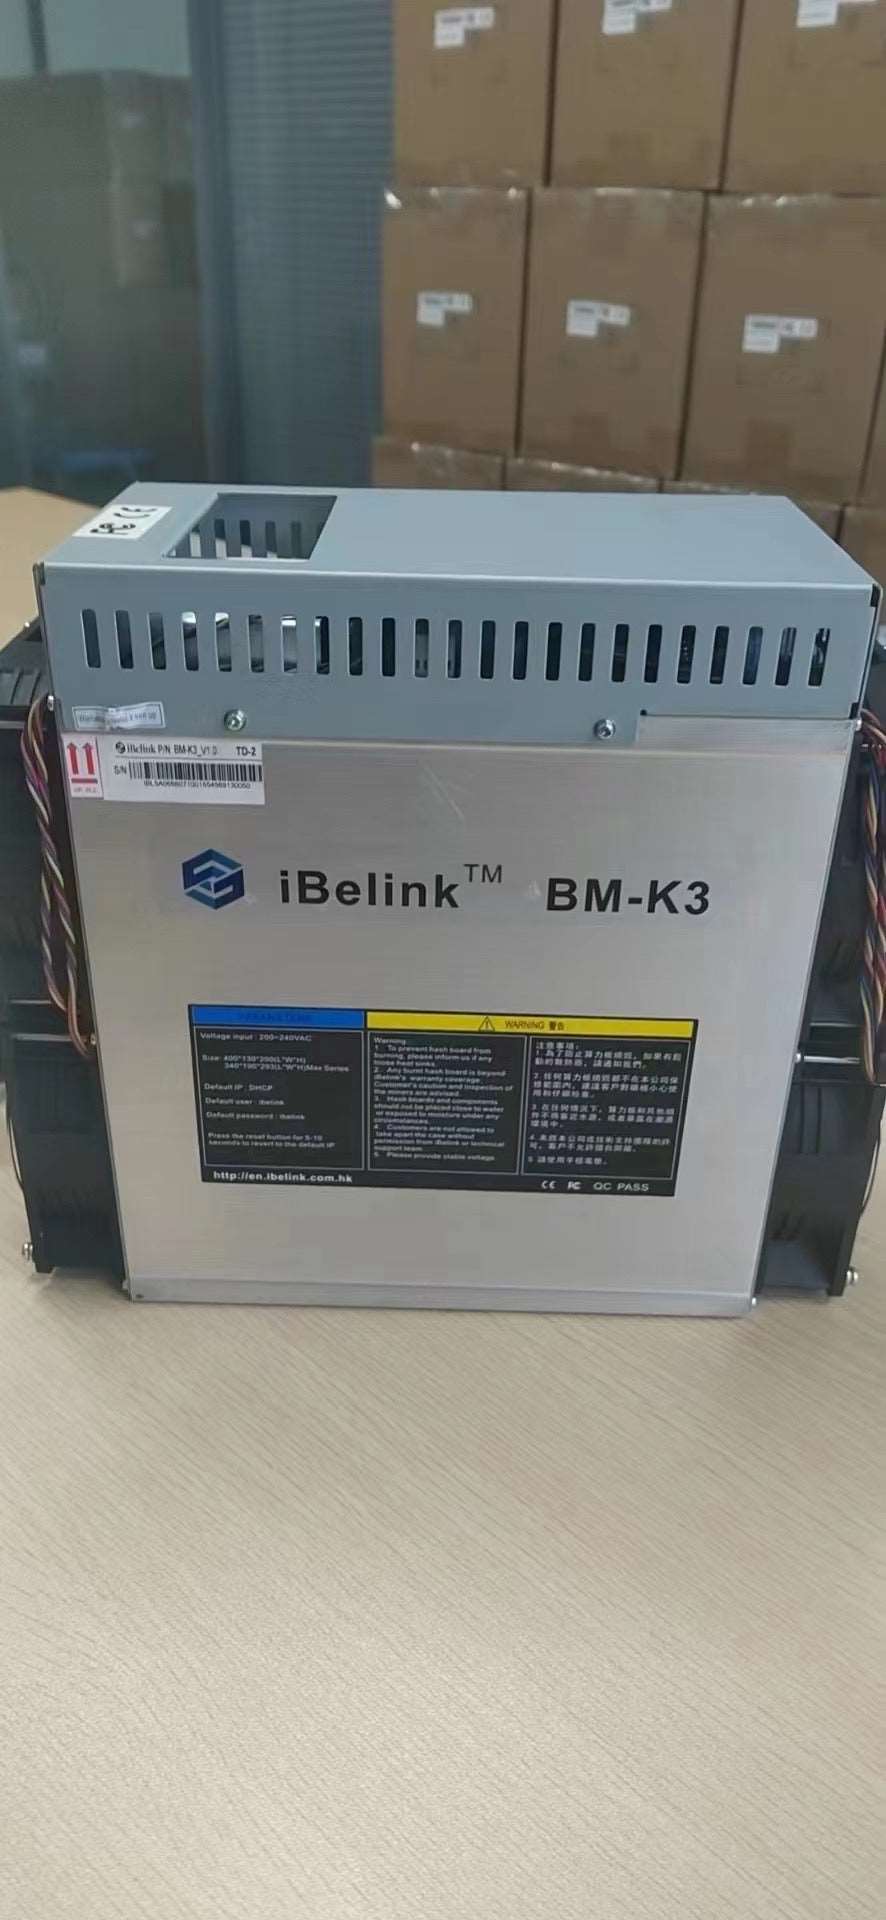 IBlink BM-K3 from iBeLink mining Kadena algorithm with a maximum hashrate of 70Th/s for a power consumption of 3300W.